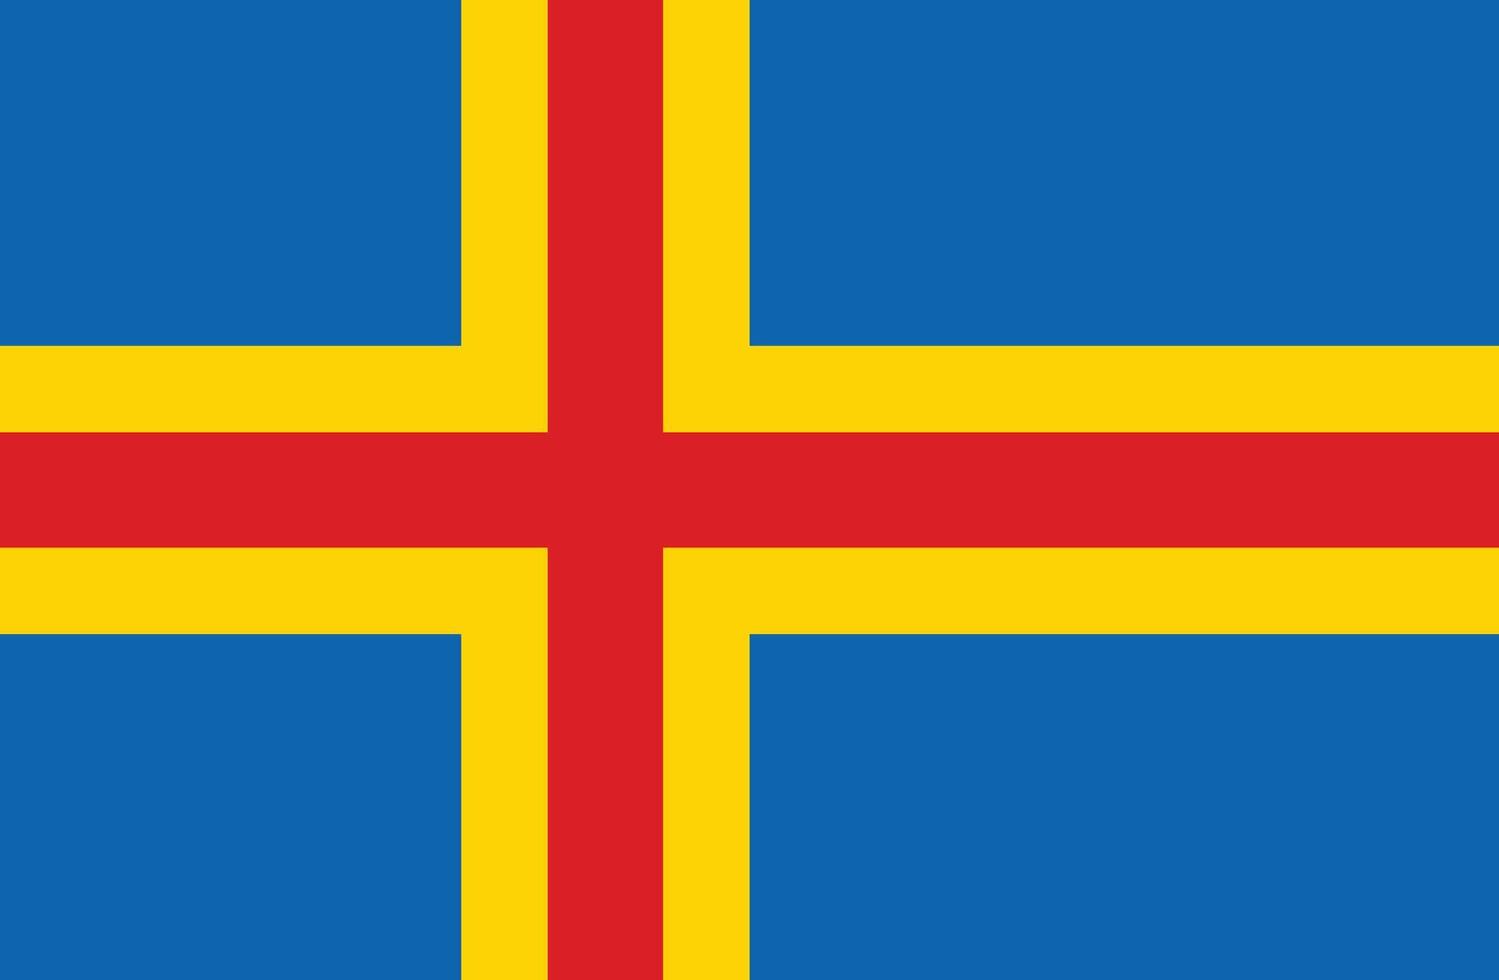 The national flag of Aland with official color and proportion vector illustration